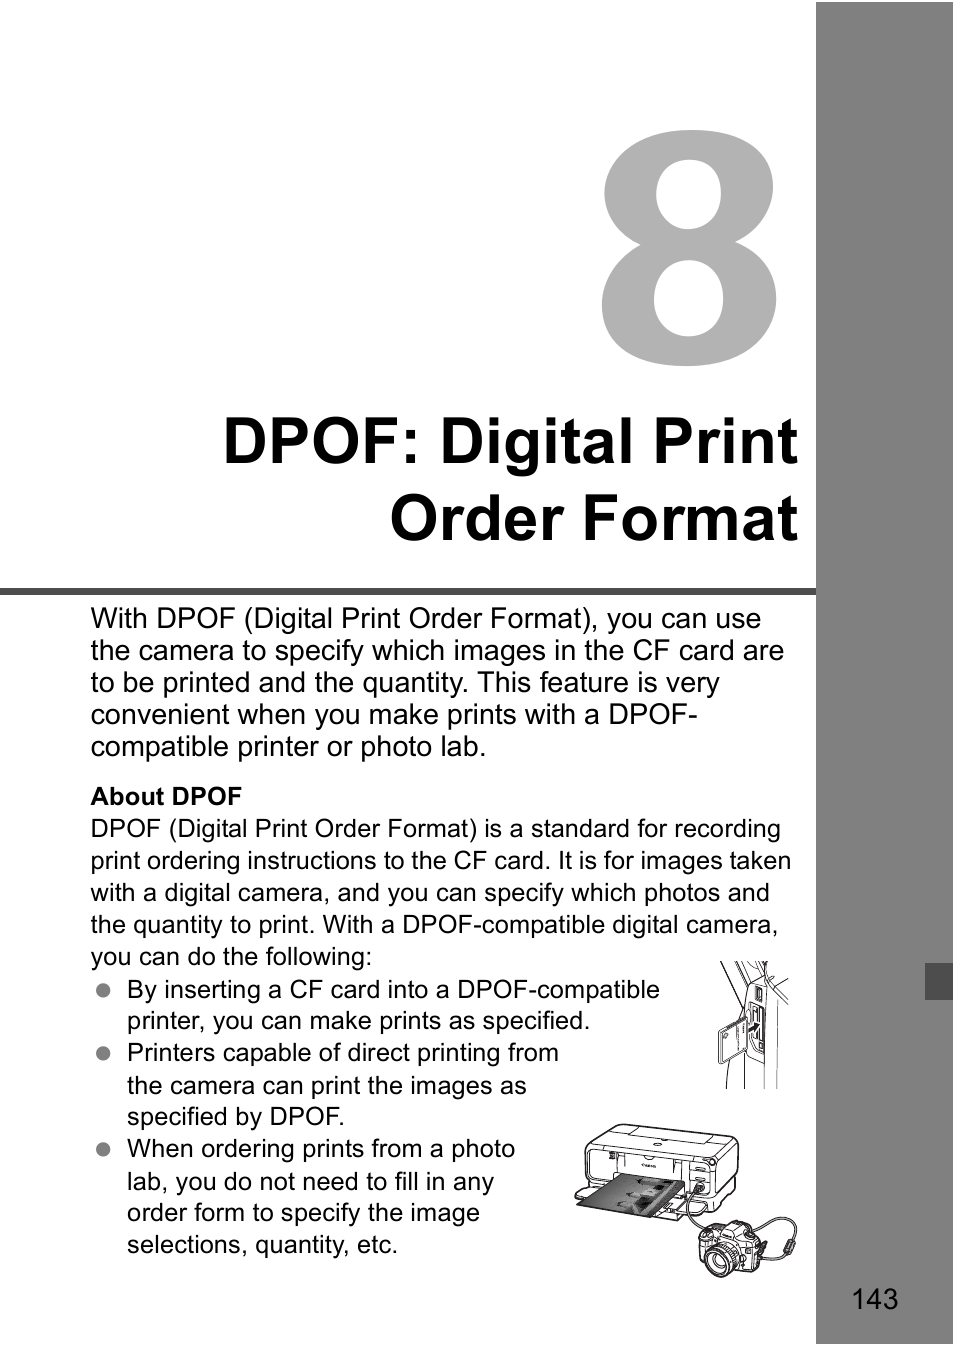 Dpof: digital print order format | Canon EOS 5D User Manual | Page 143 / 184